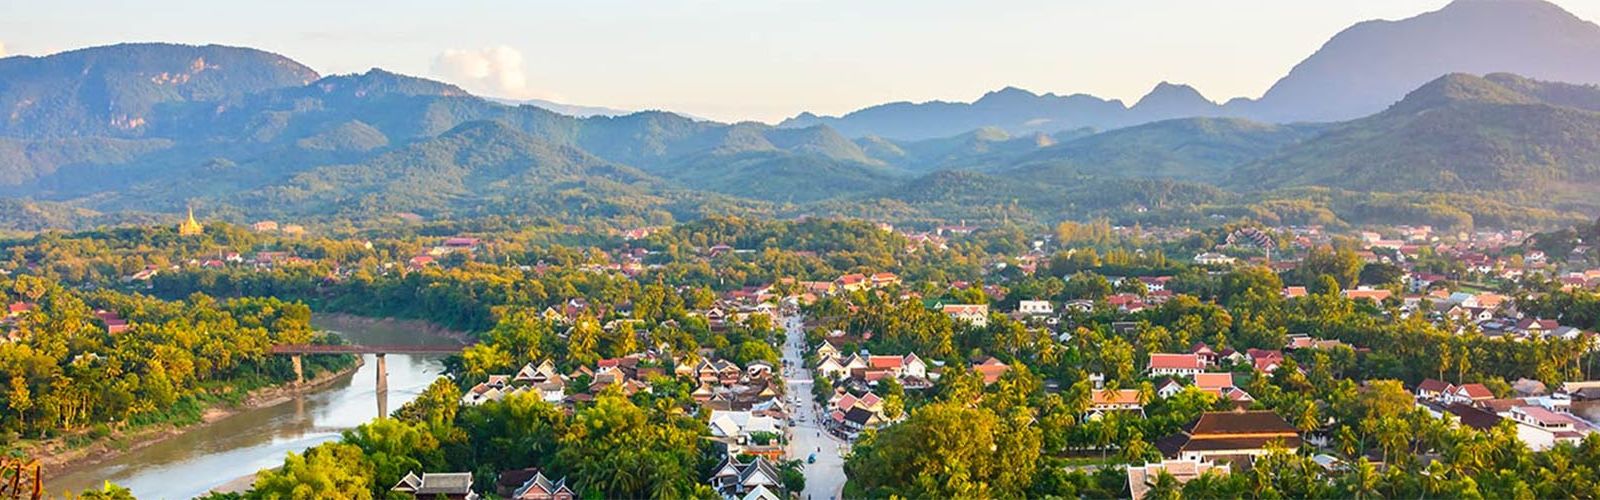 Private  Vehicle For Vientiane To Luang Prabang Journey | best place | Asianventure Tours